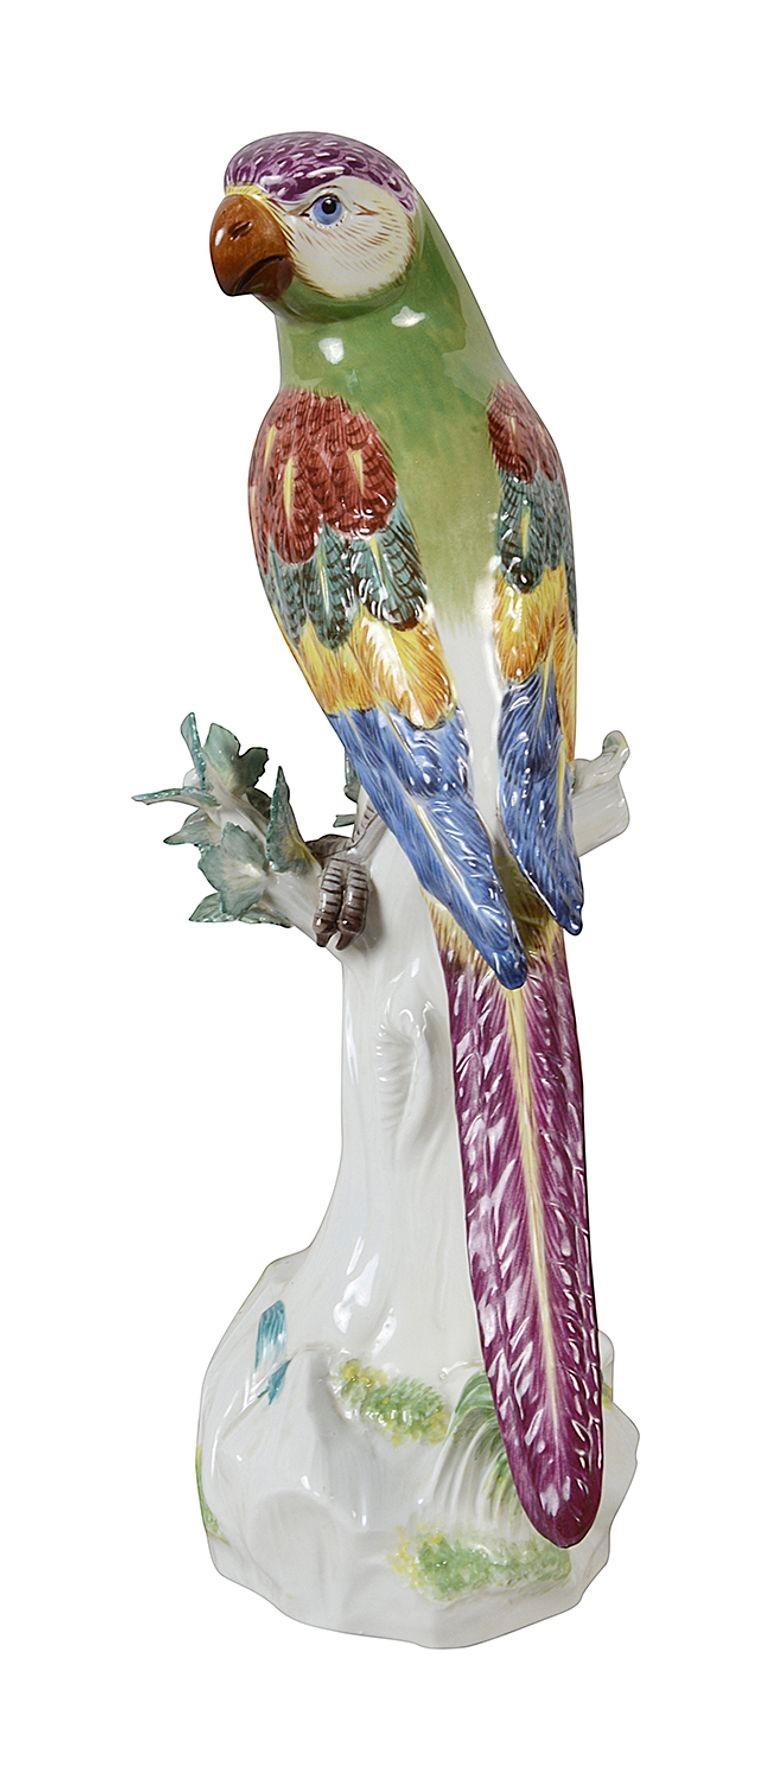 A fine quality late 19th Century Meissen porcelain Parrot perched on a tree trunk, having wonderful bold colouring.
Signed to the base with blue crossed swords.

Batch 77 62748 DNKZZ